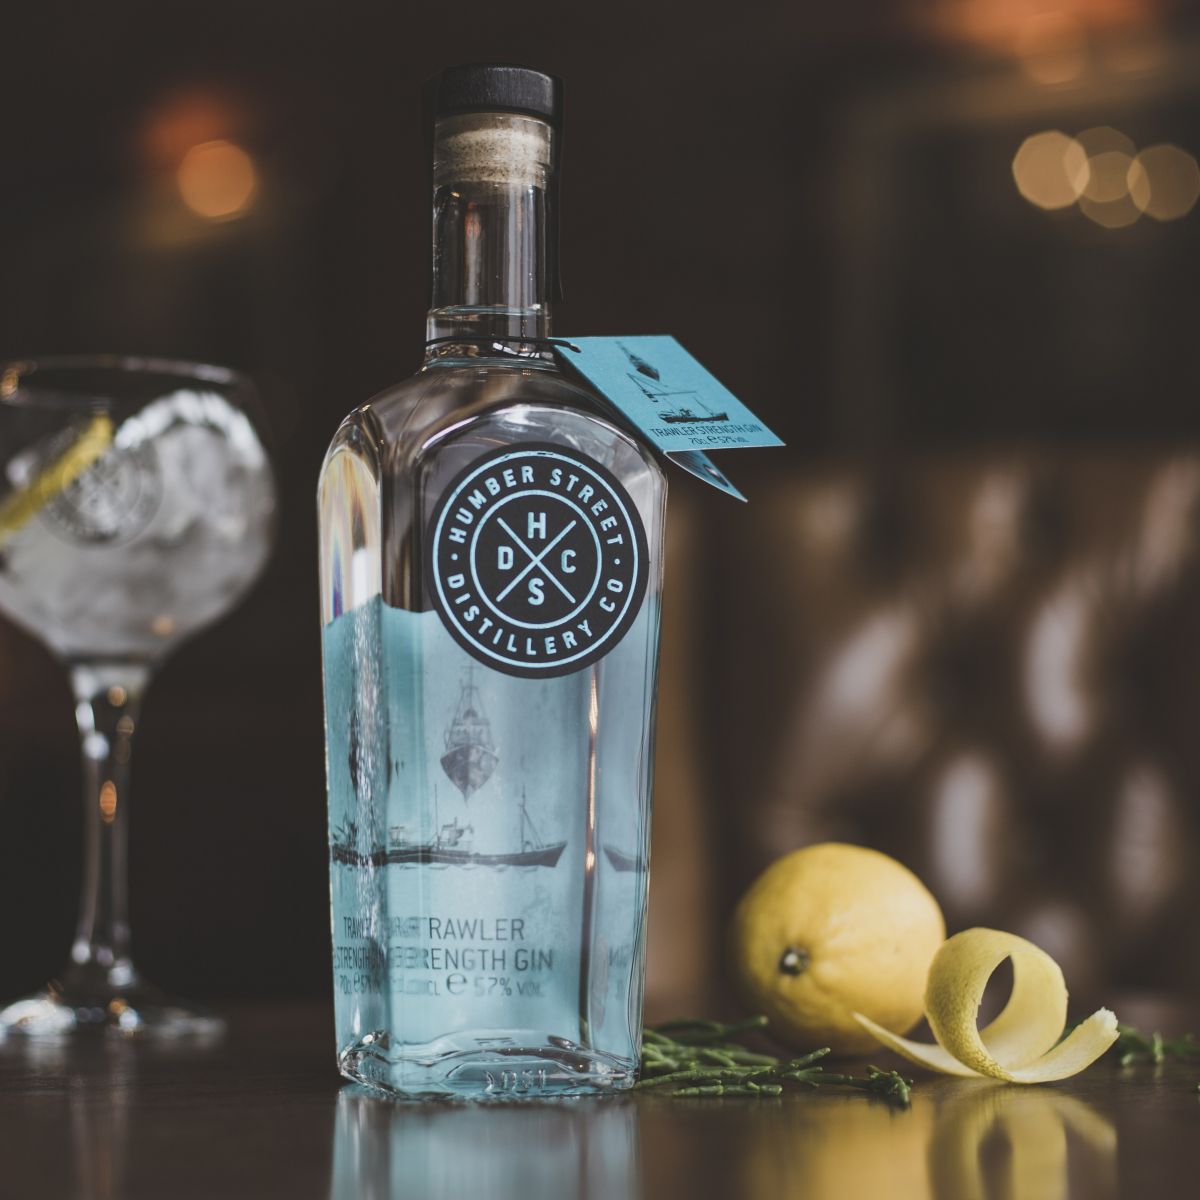 A new Trawler strength gin, proceeds go towards project